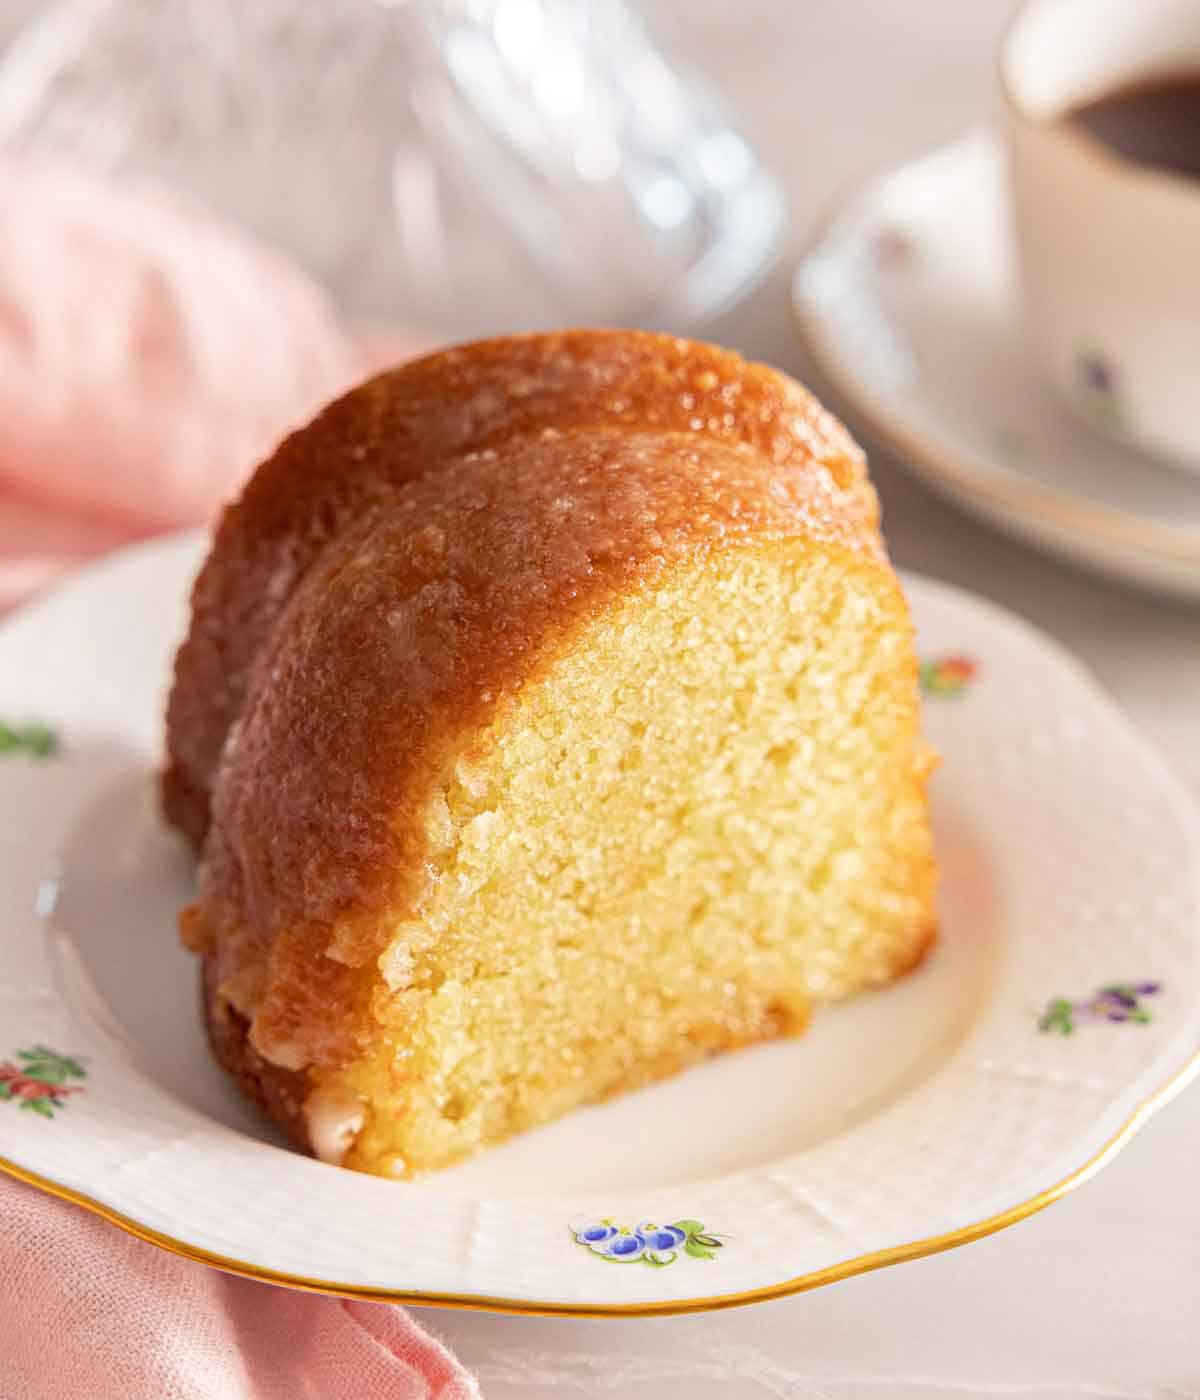 Close up view of a plate with a slice of butter cake.